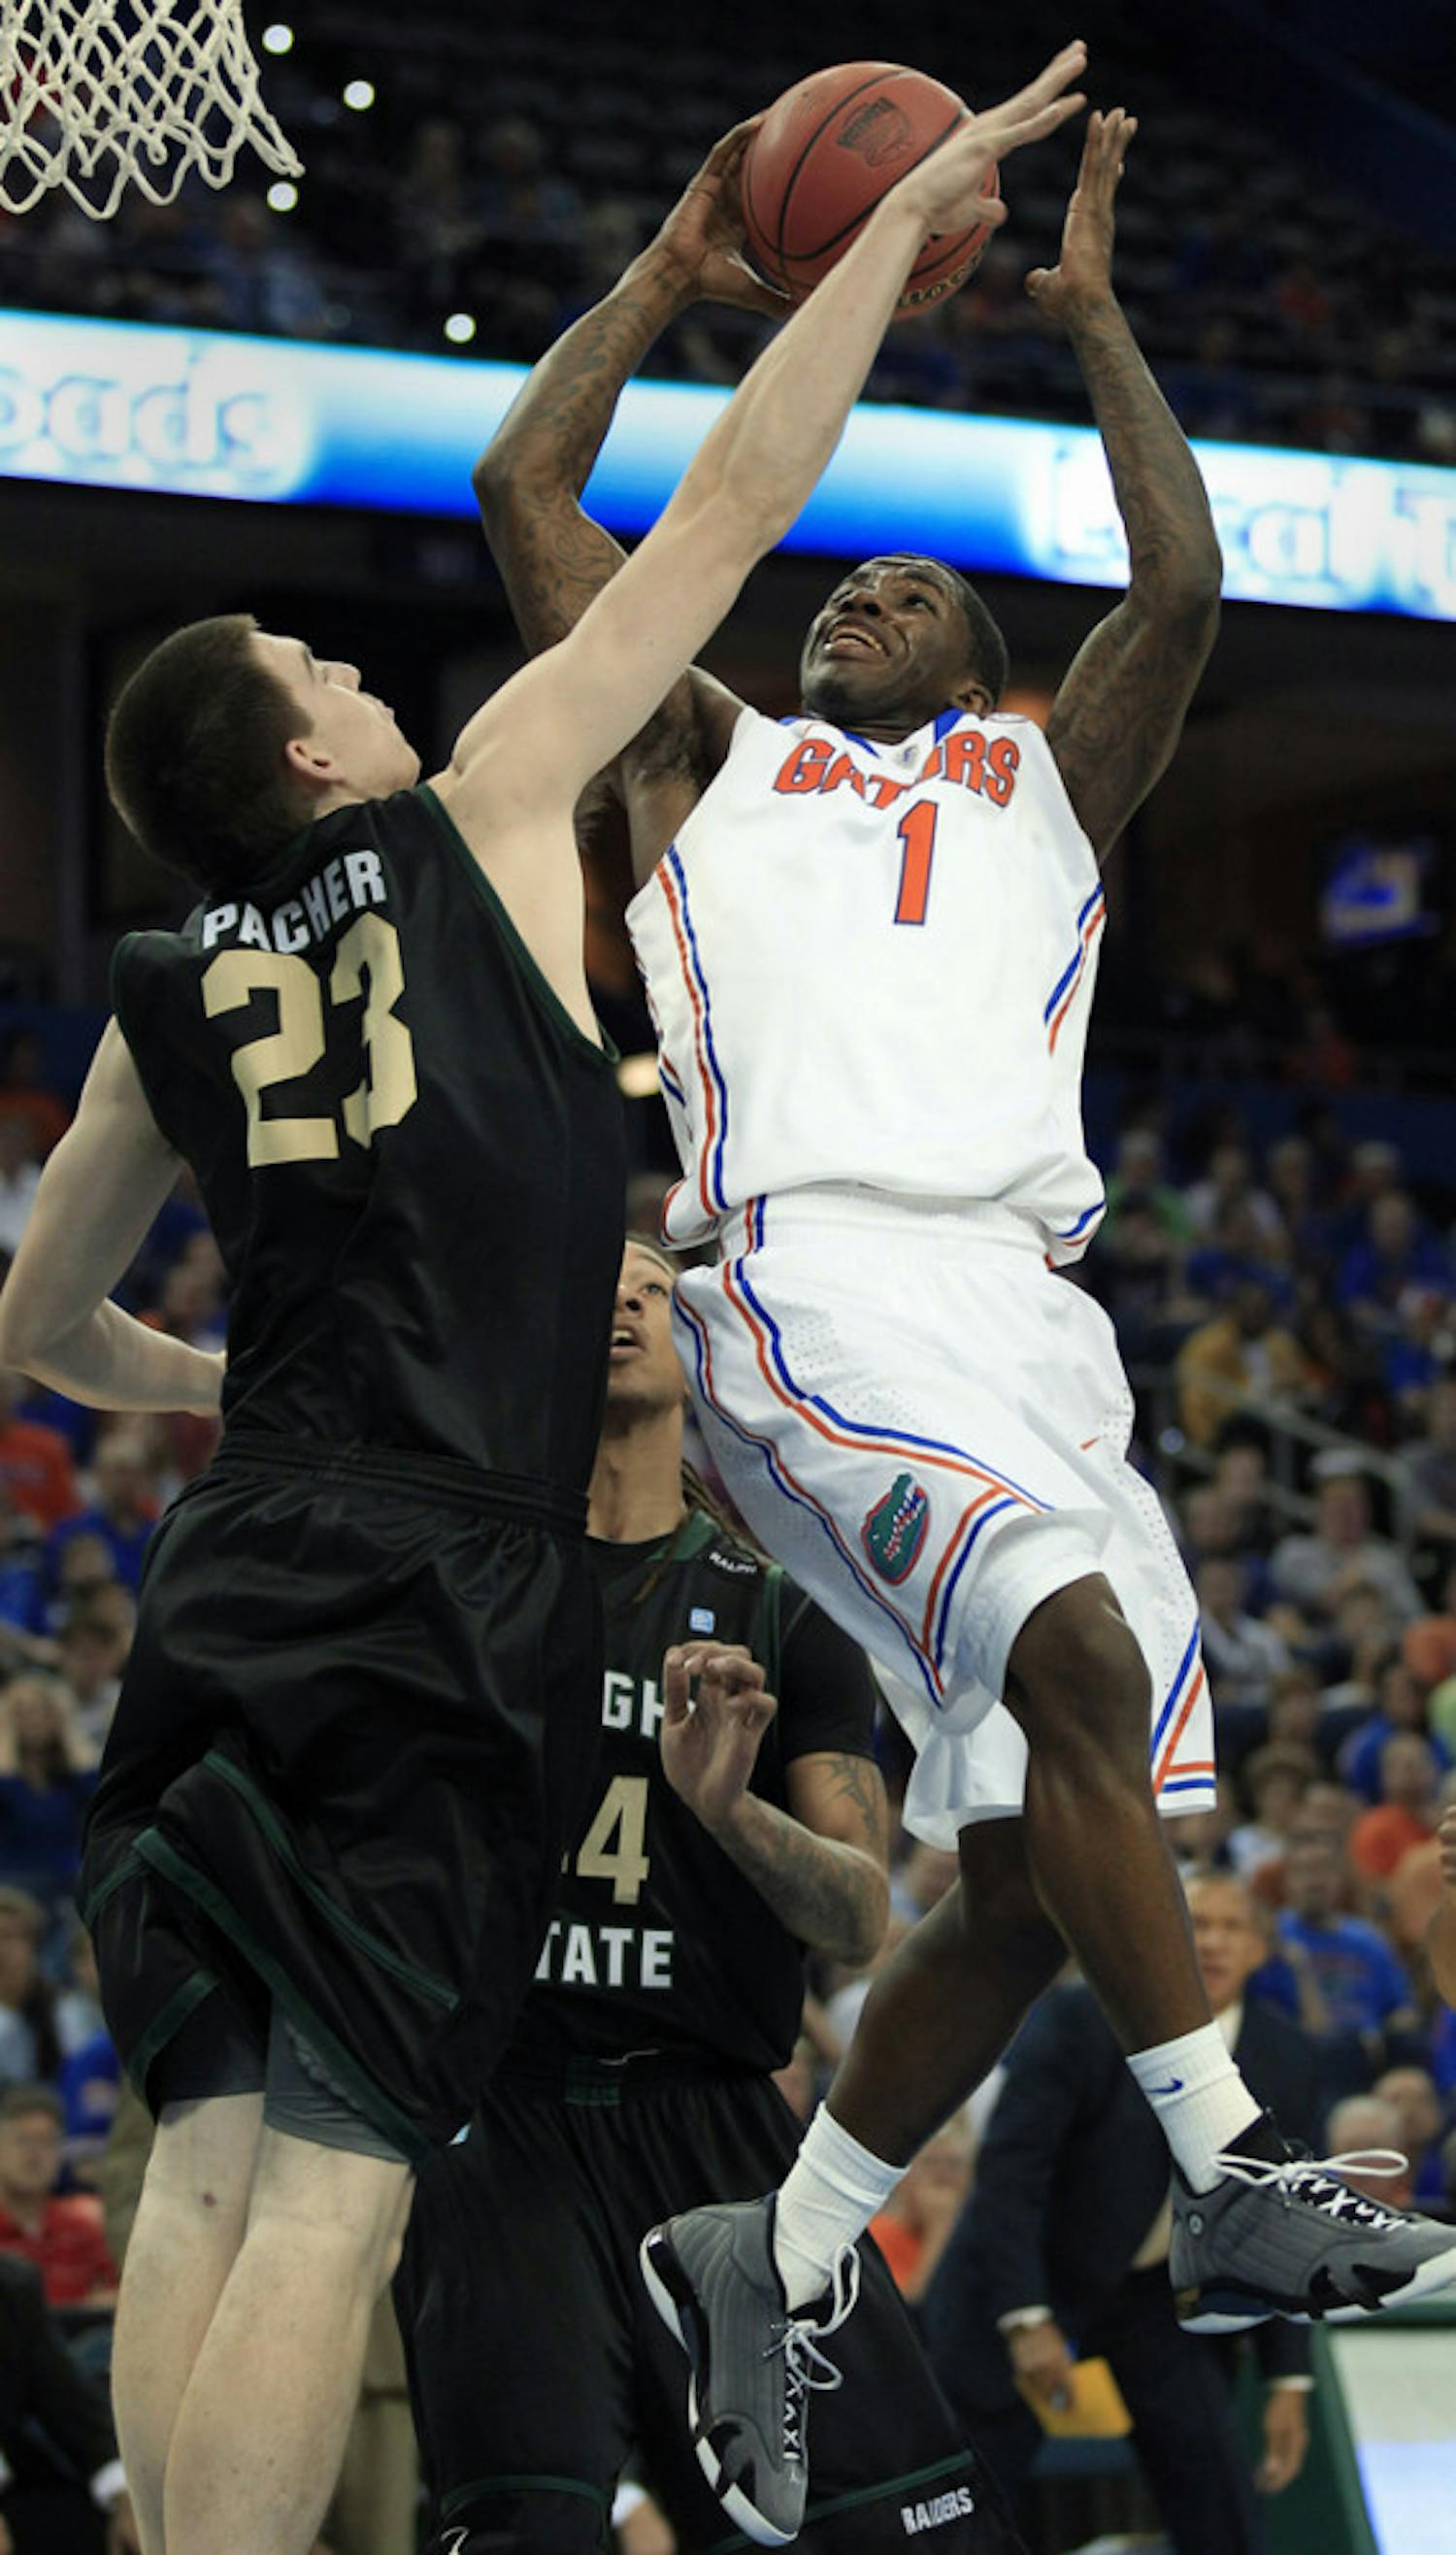 Florida junior guard Kenny Boynton scored 22 points Monday off a
game-high six 3-pointers in a 78-65 win against Wright State.